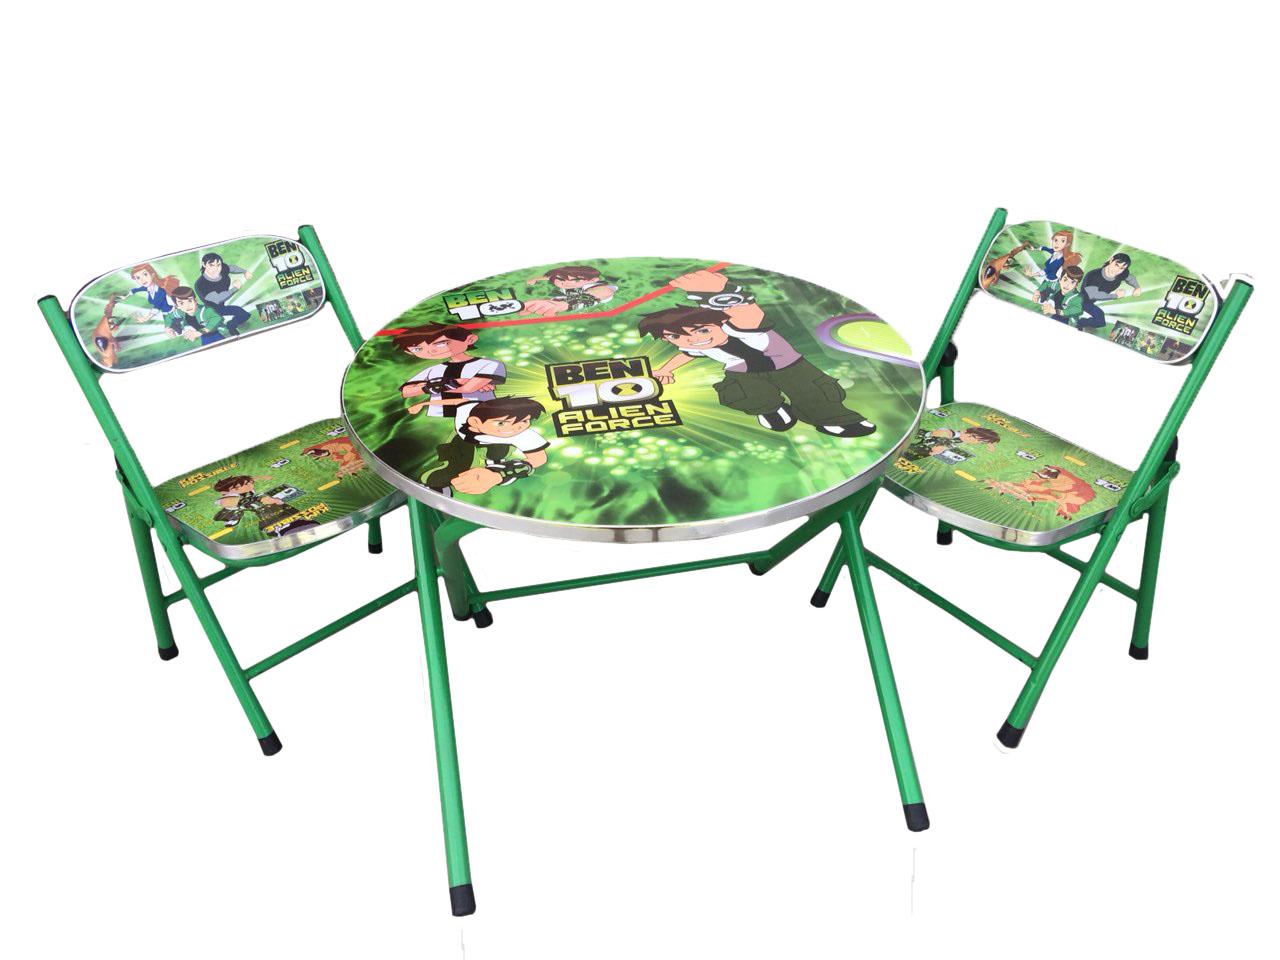 cartoon character table and chair set